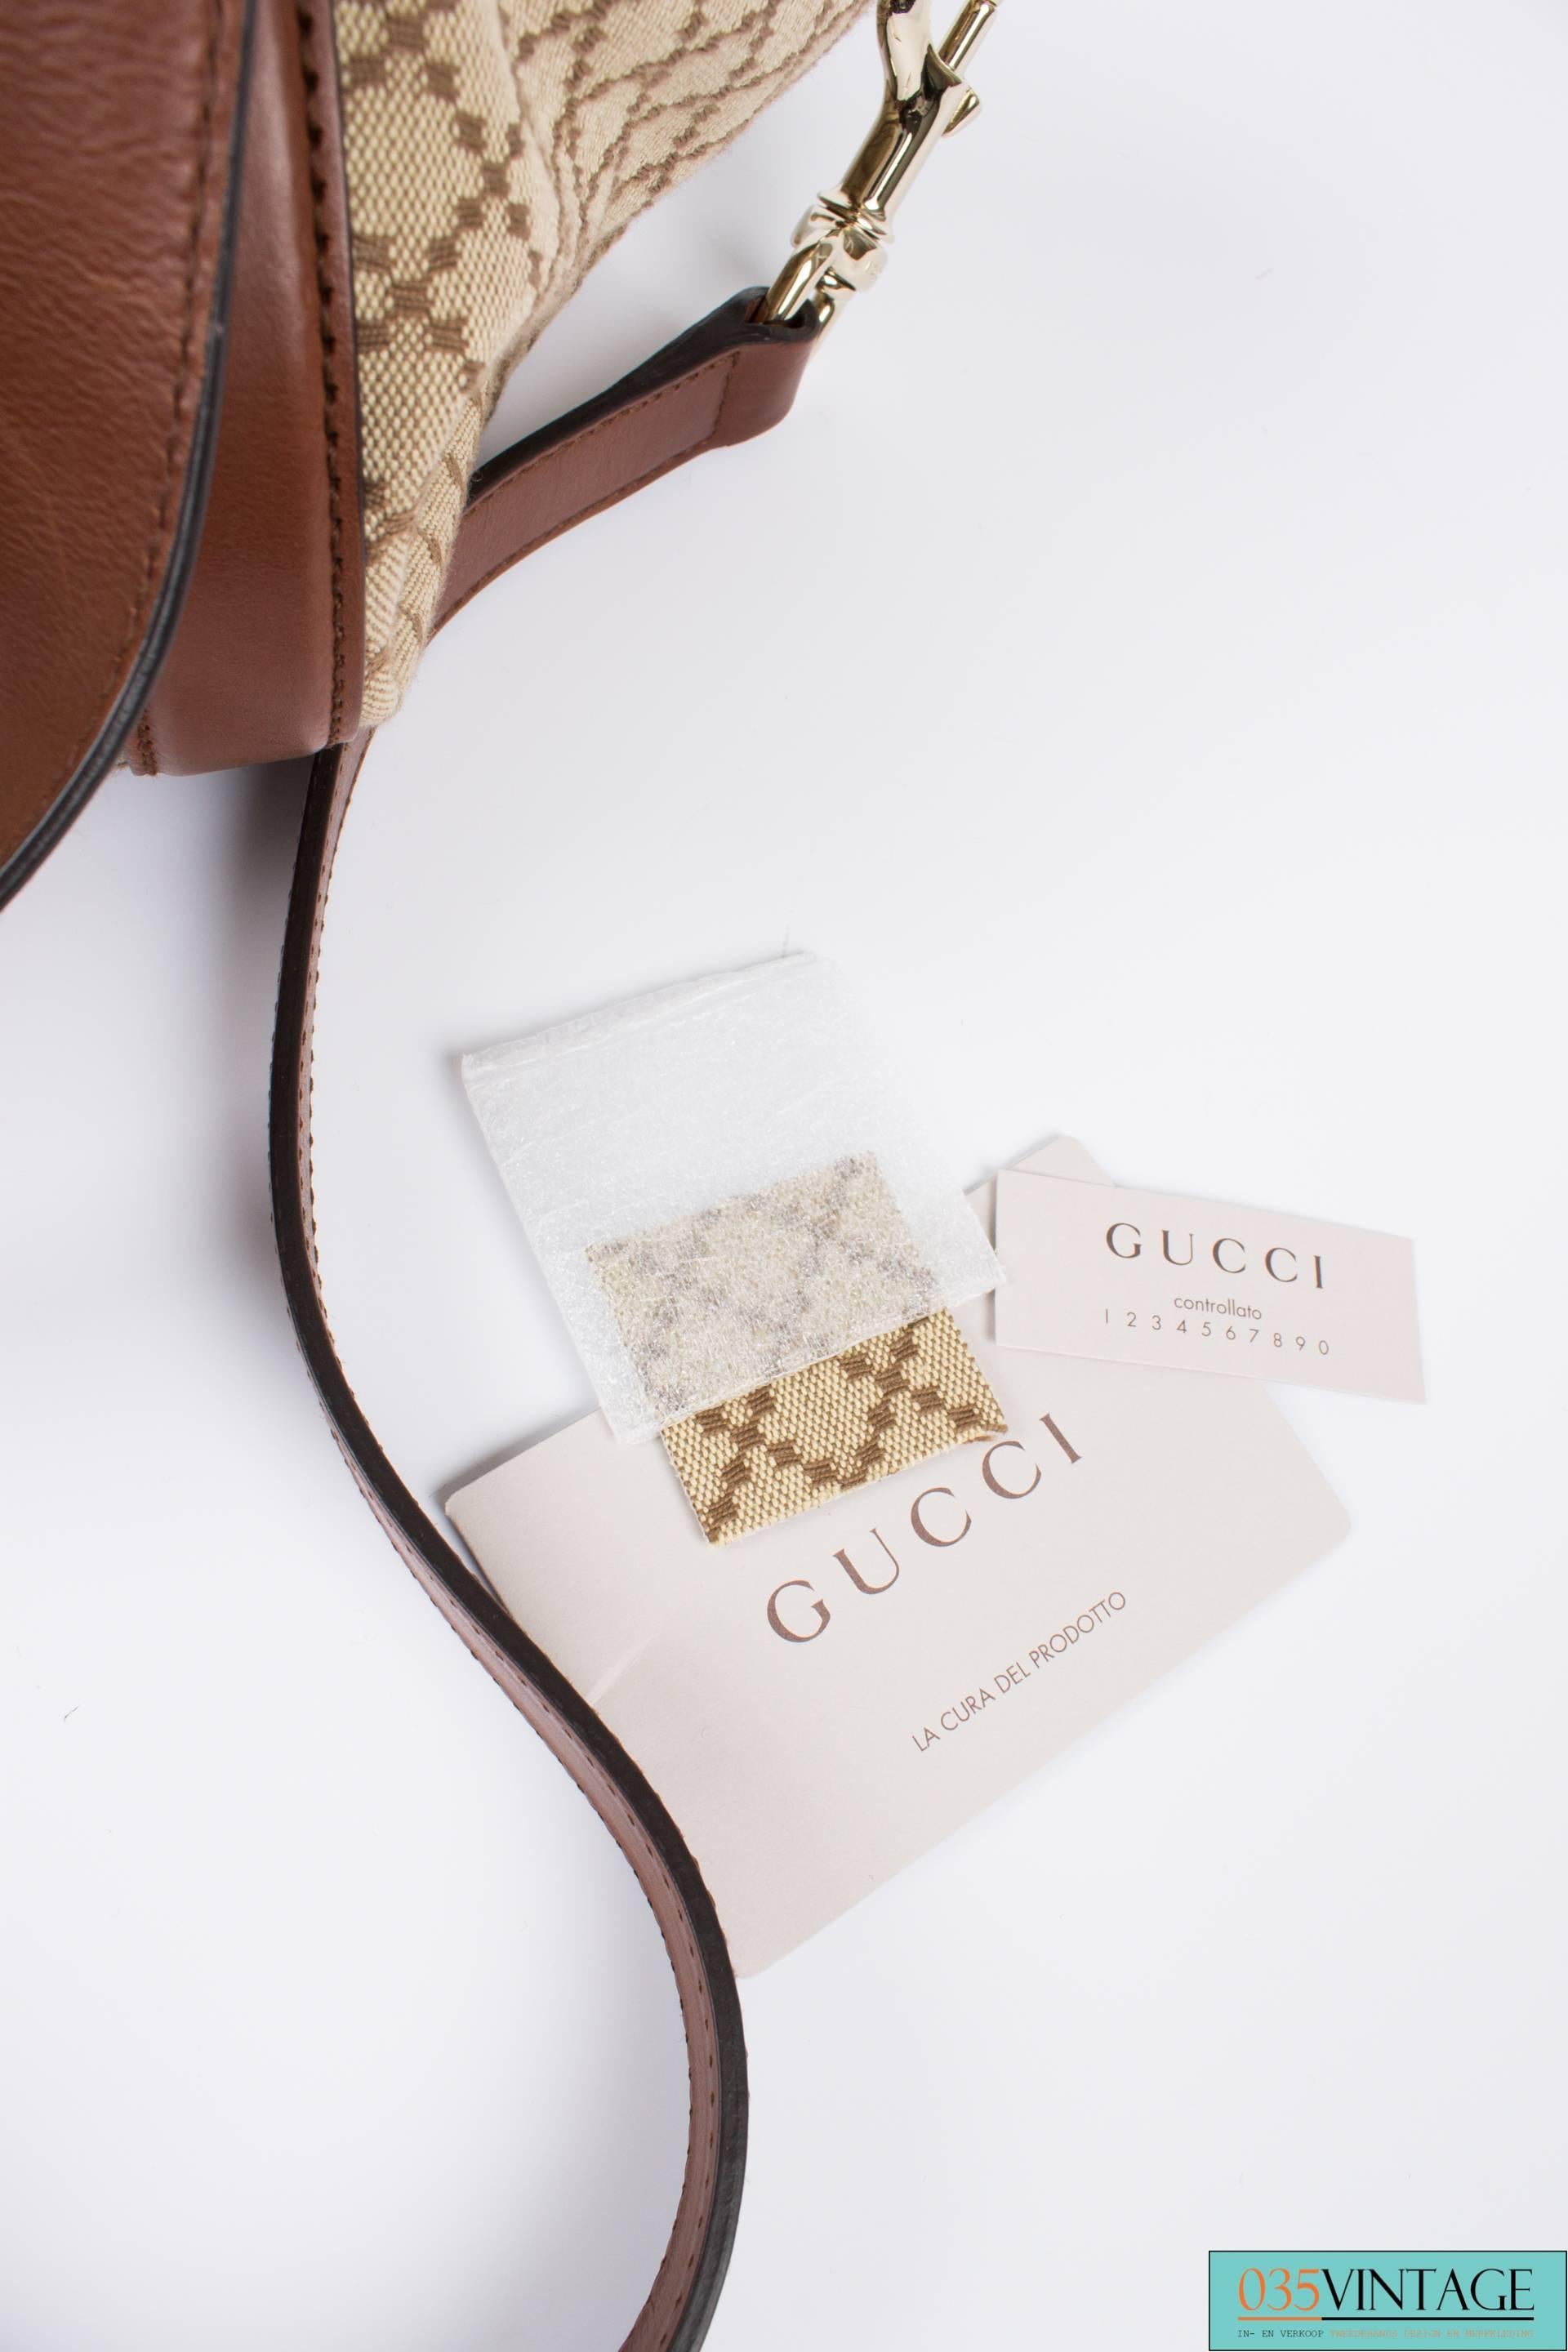 A classic one by Gucci: this is the Diamante Canvas Village Double G Tote! And it's beautiful!

Made of stirdy beige canvas with a woven diamond pattern, brown leather trimming and very light gold-toned hardware. The interior is fully lined with